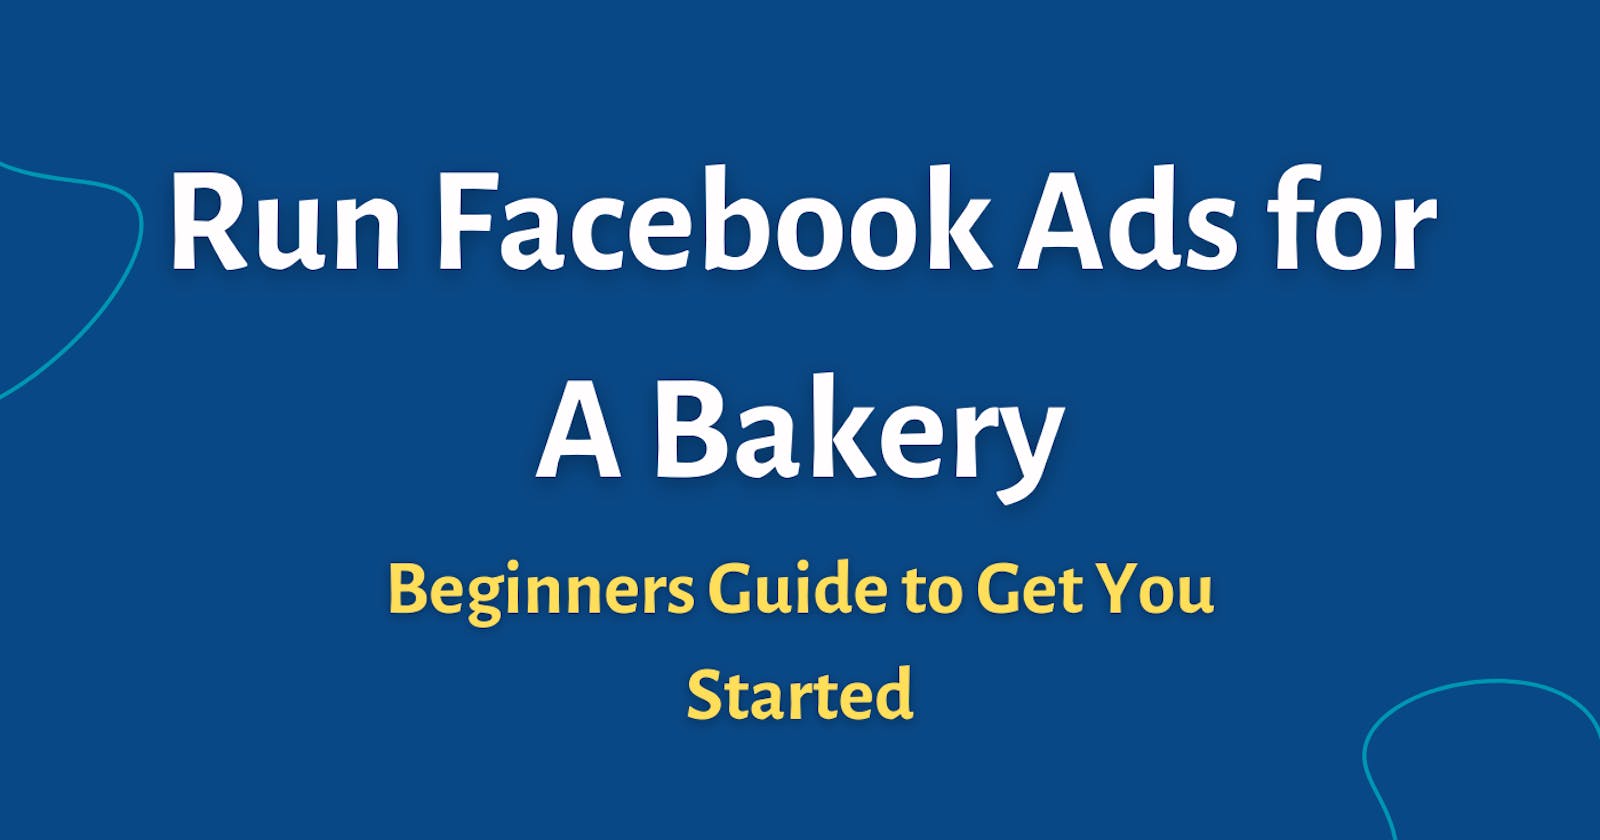 Running Paid Ads for Bakery Business  [Beginners Guide]